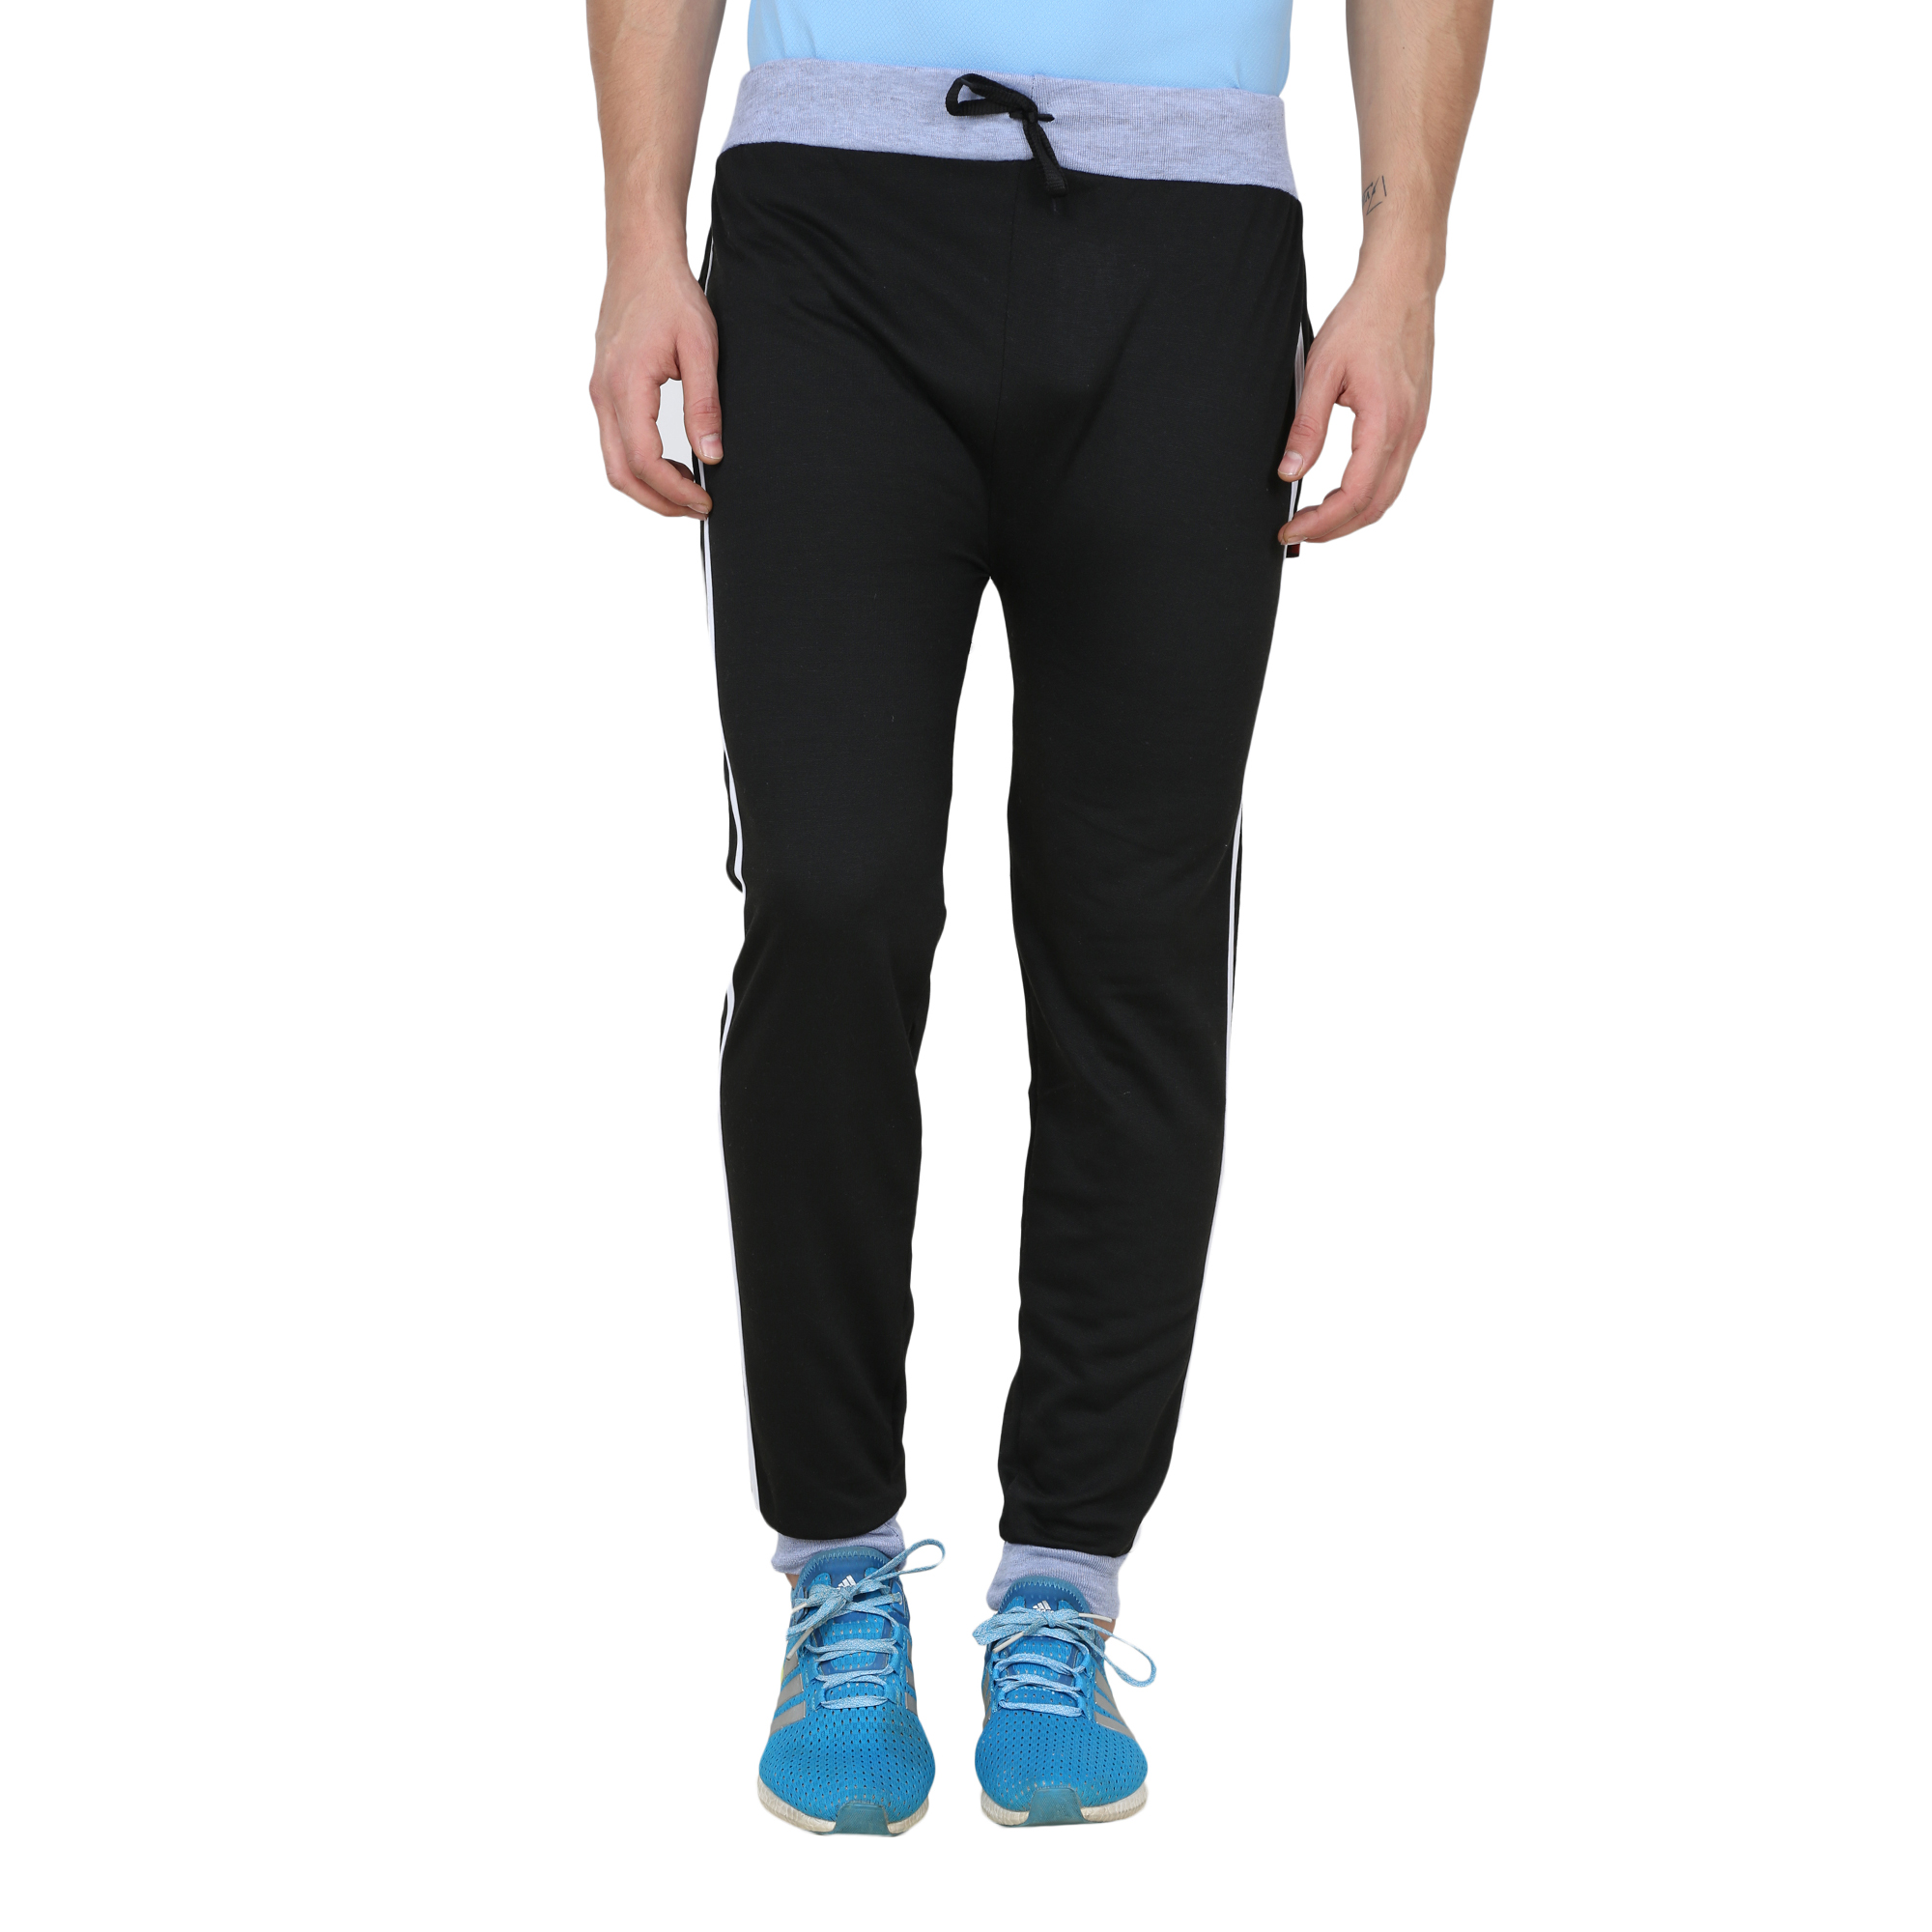 Buy Swaggy Solid Men's Track Pants Online - Get 36% Off